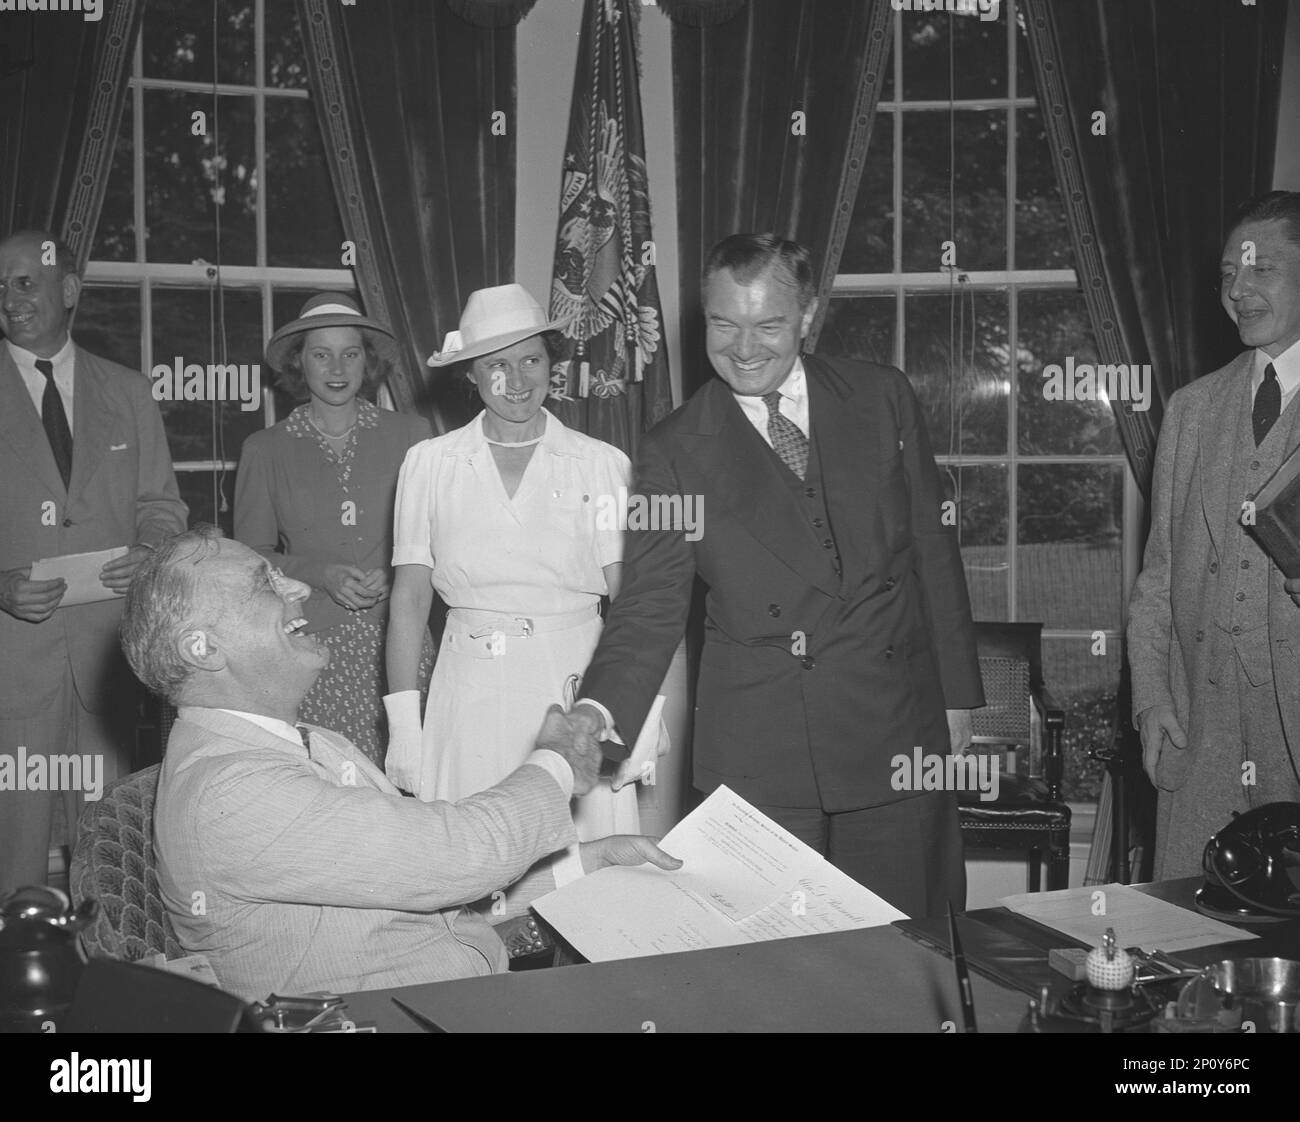 Robert H. Jackson Sworn in As Justice, Washington, D.C. July 11 1941. Robert [Houghwout] Jackson Was Sworn in As Associate Justice of The Supreme Court in President Roosevelt's Office Before An Audience Comprising Most of The High Officials of The New Deal with Whom He Had Been Associated For Seven Years. Picture Shows The President As He Congratulates Jackson. Left To Right: Mary Jackson, Daughter of Mr. Jackson, Mrs. Jackson [Irene Gerhardt] And Robert Jackson. President Roosevelt Is in Left Foreground. Stock Photo